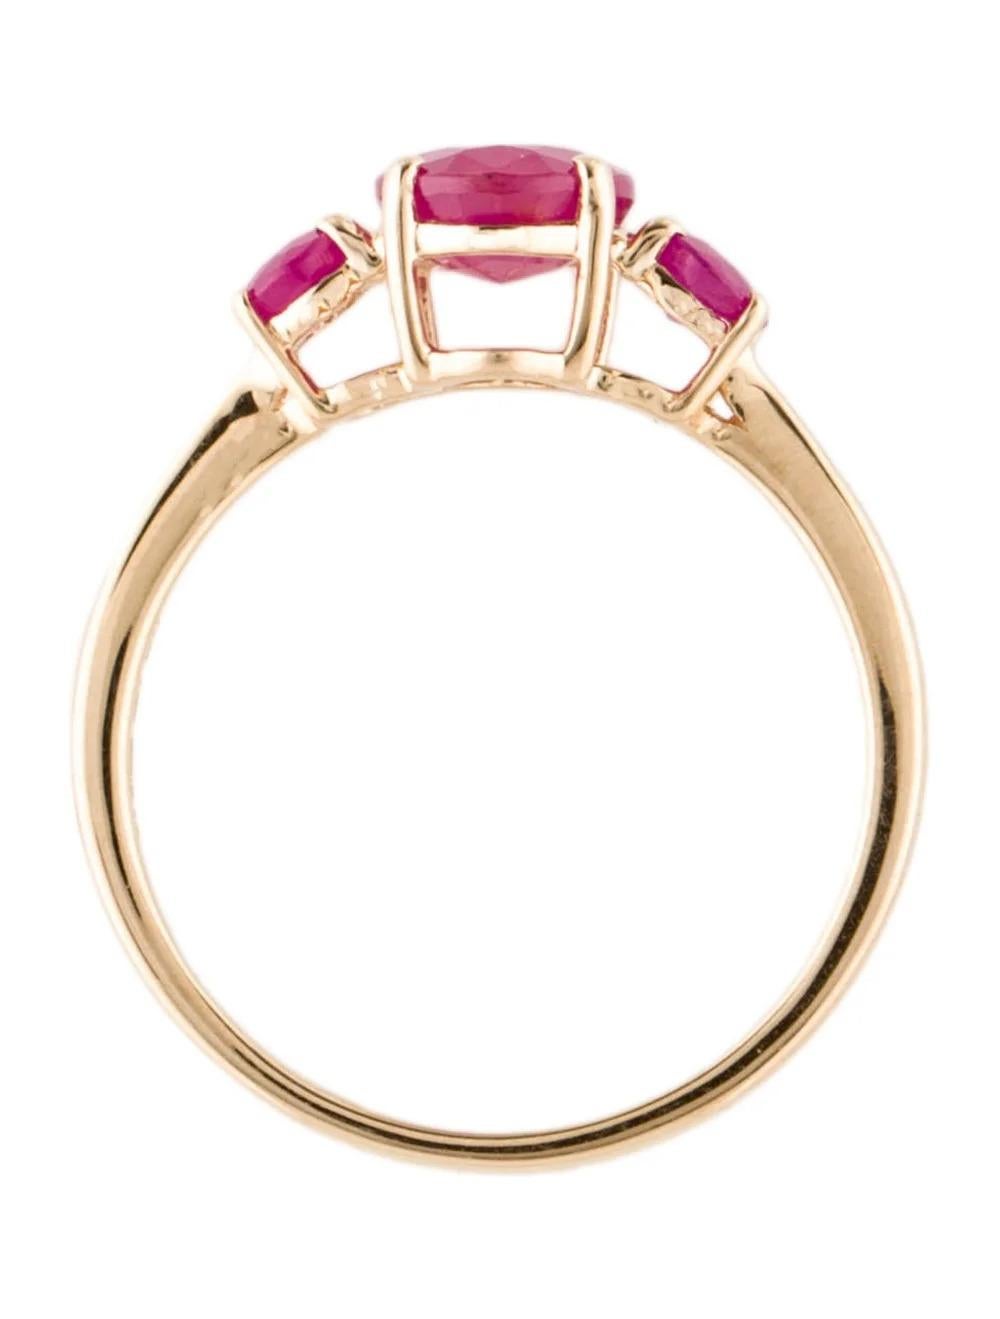 Women's 14K Yellow Gold 1.31ct Ruby Cocktail Ring, Size 6.75: Timeless Elegance For Sale